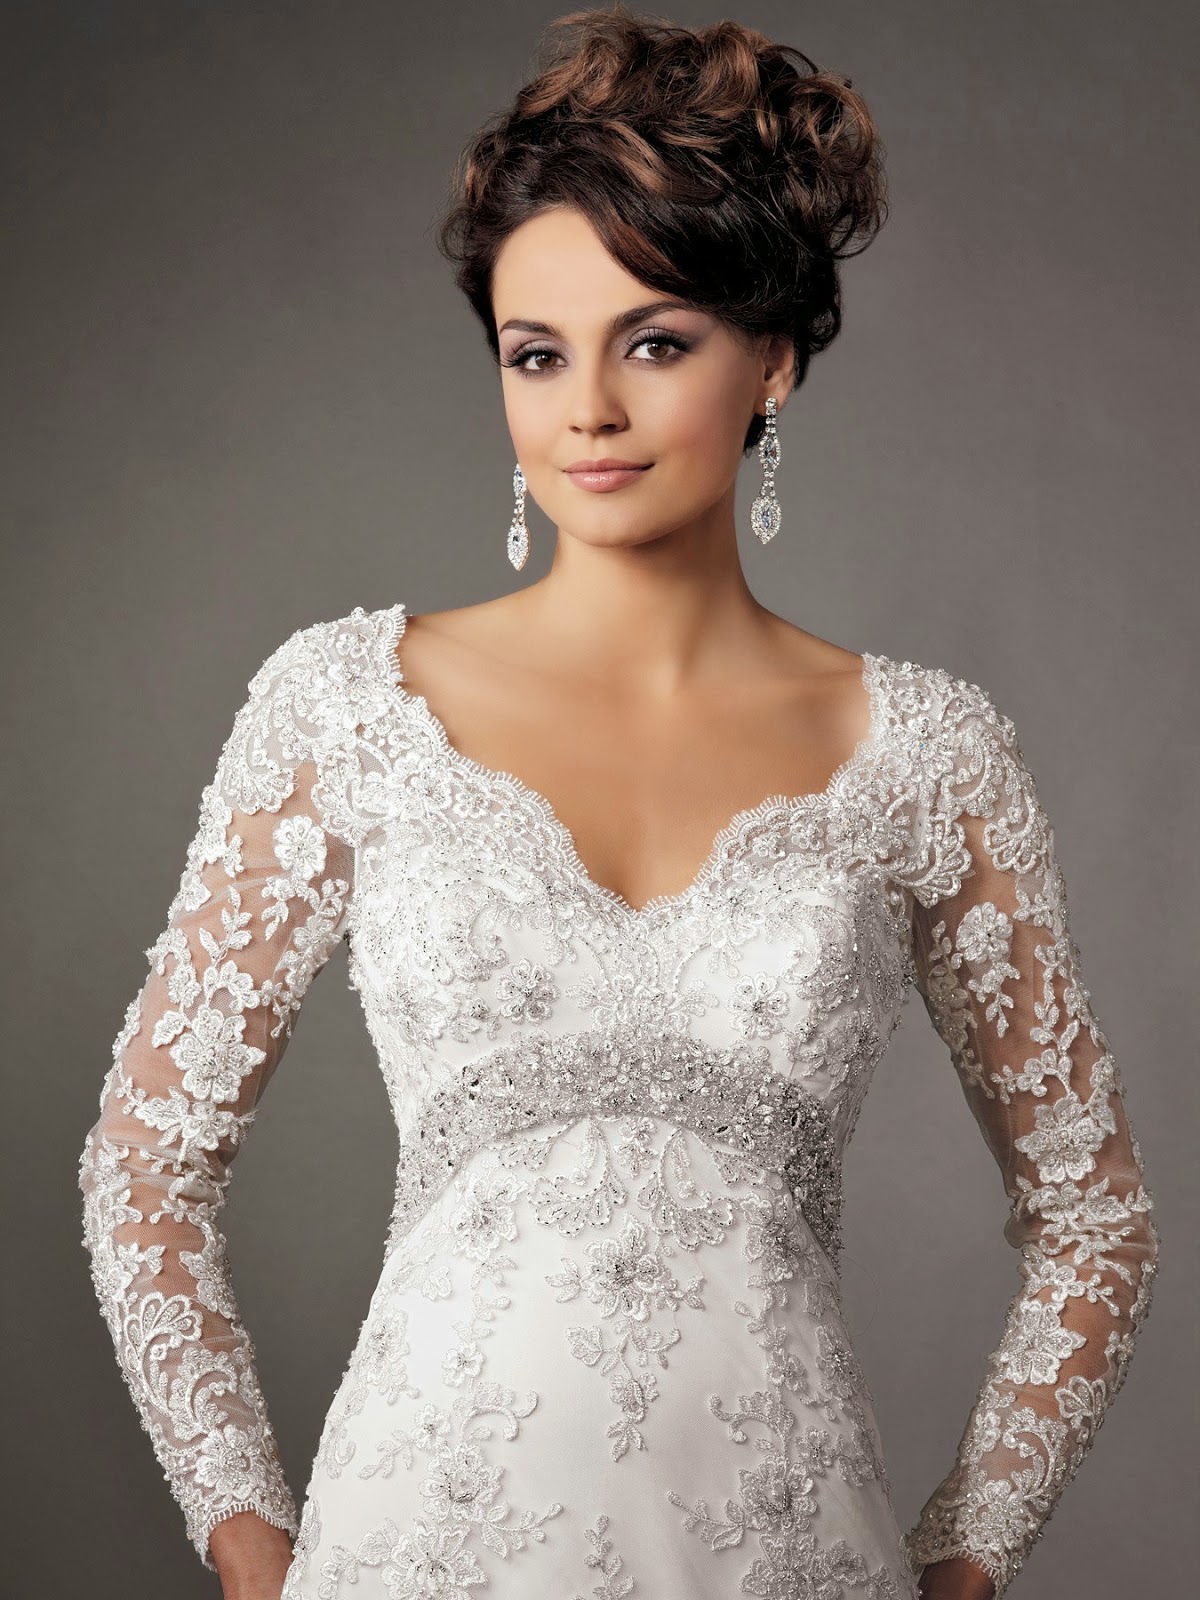  Vintage Lace Top Wedding Dresses of the decade The ultimate guide 